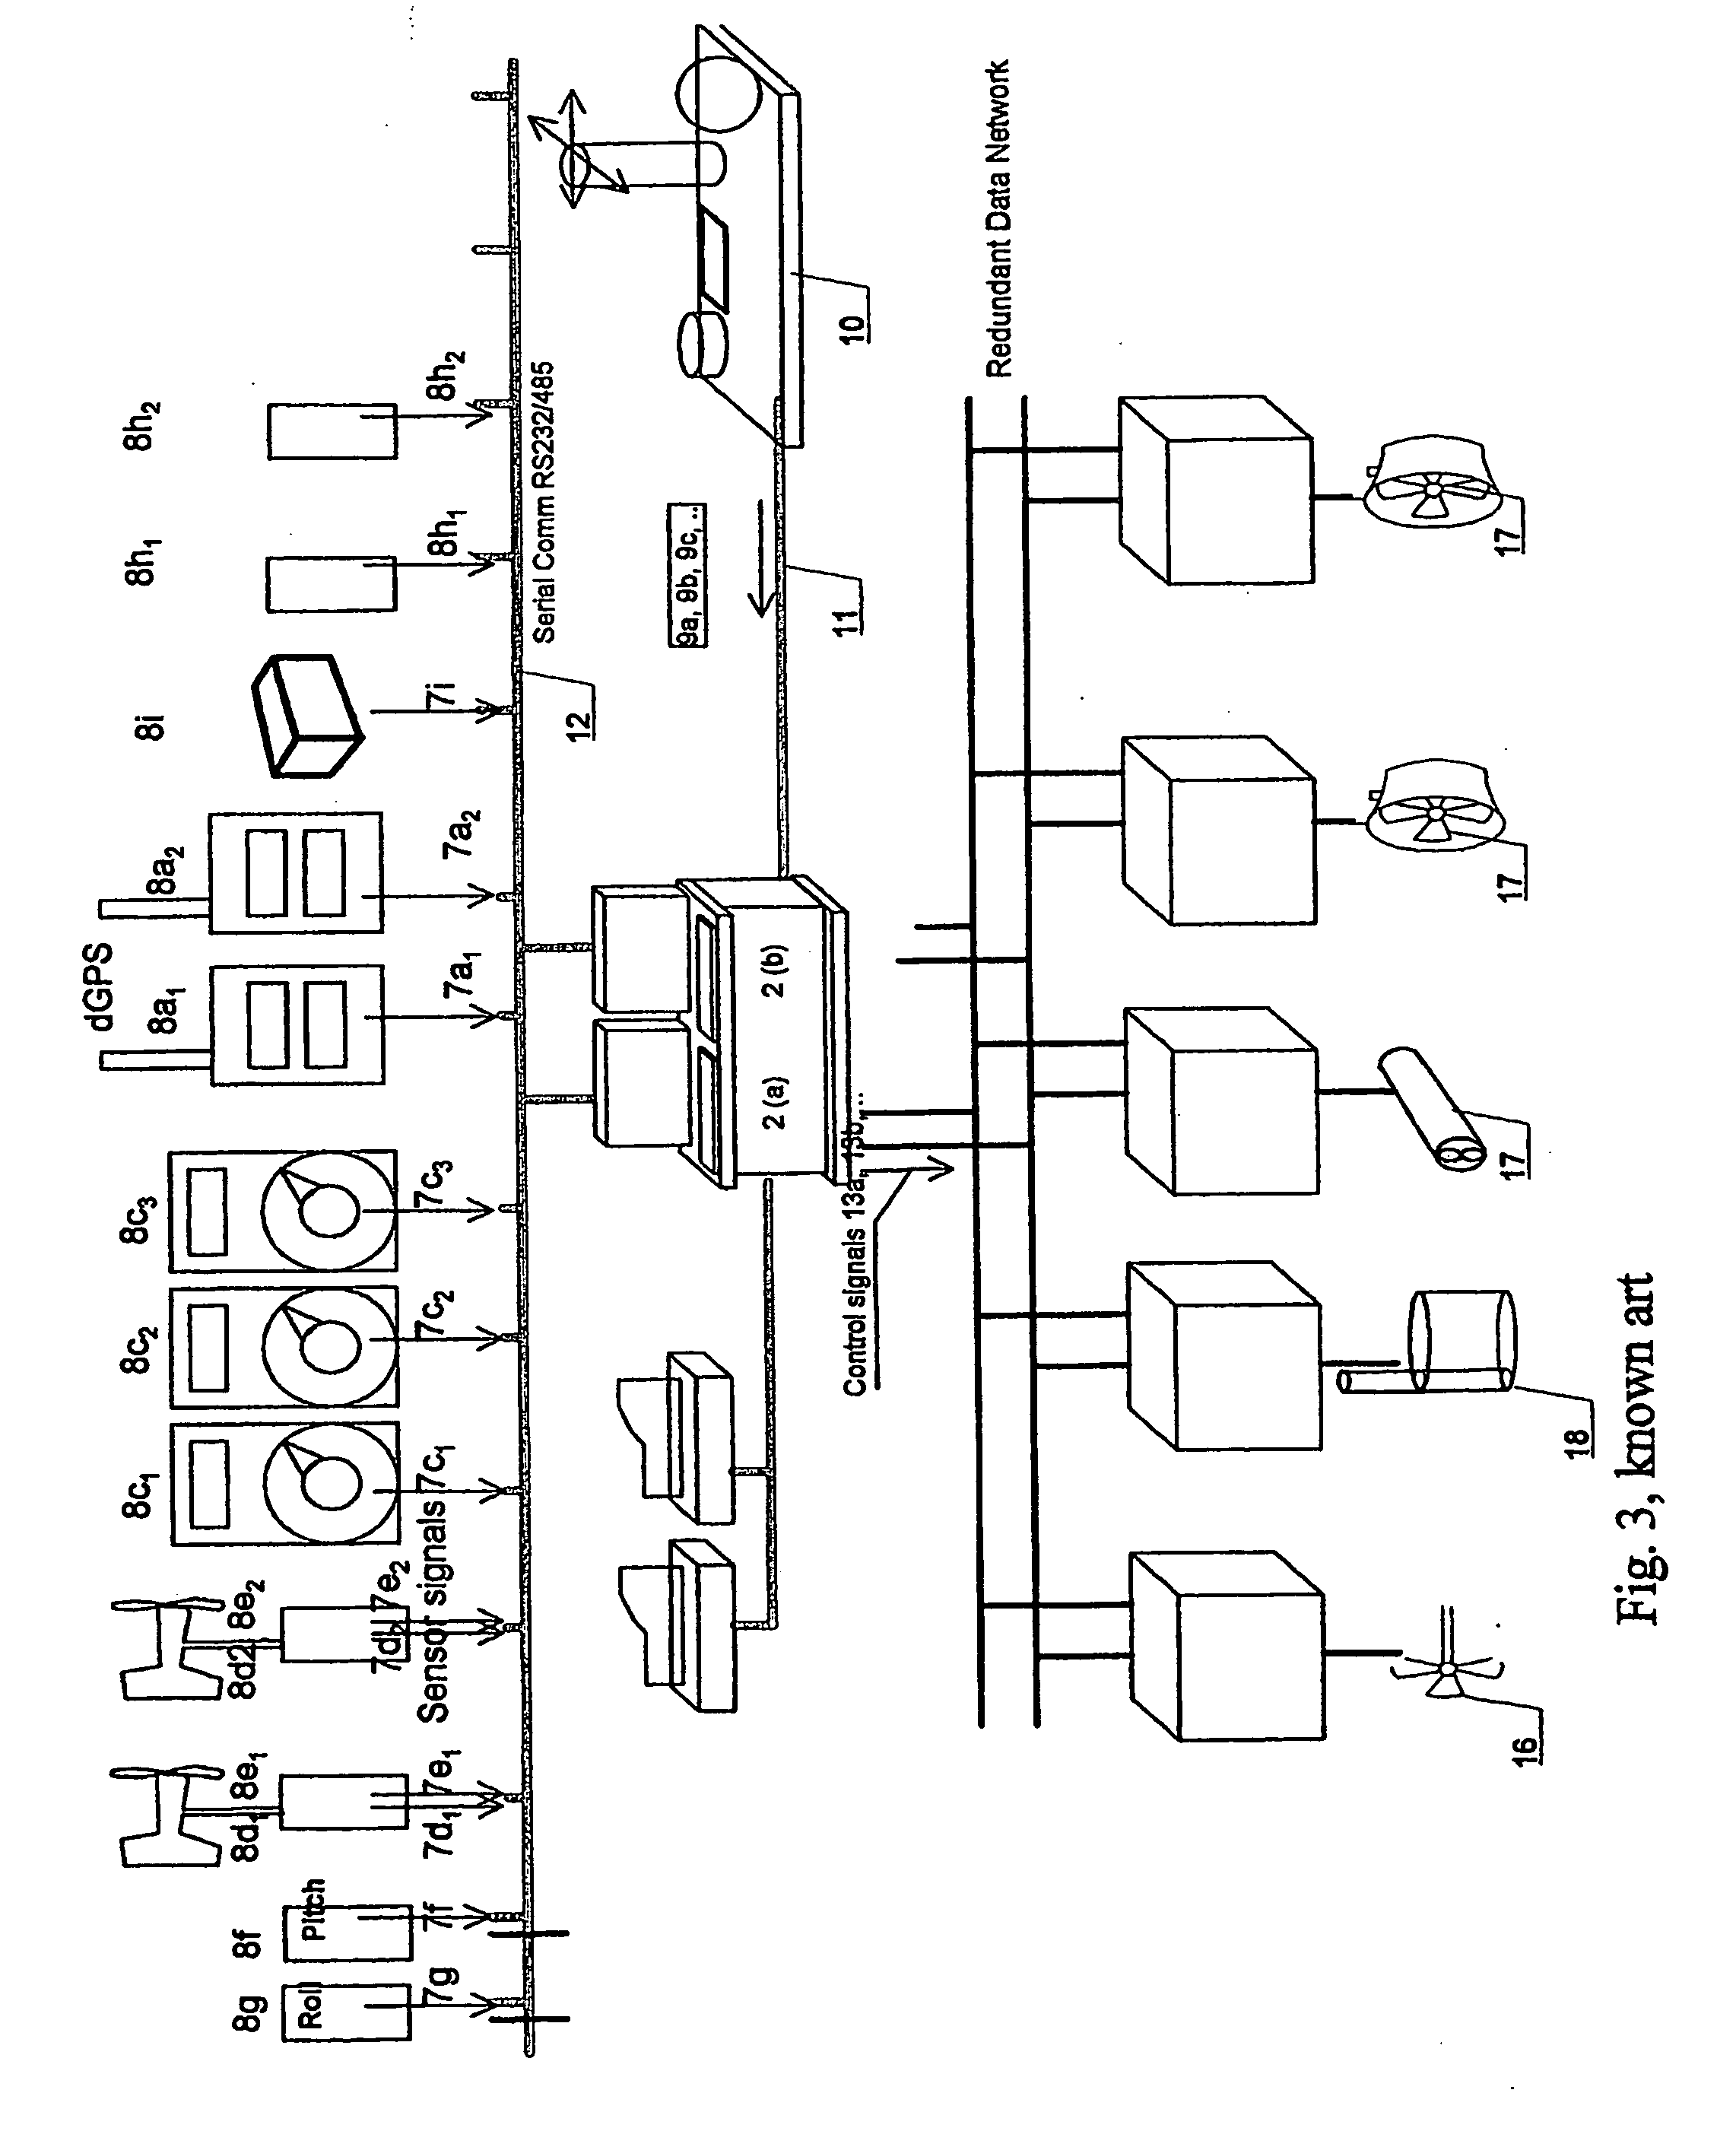 System and method for testing a control system of a marine vessel